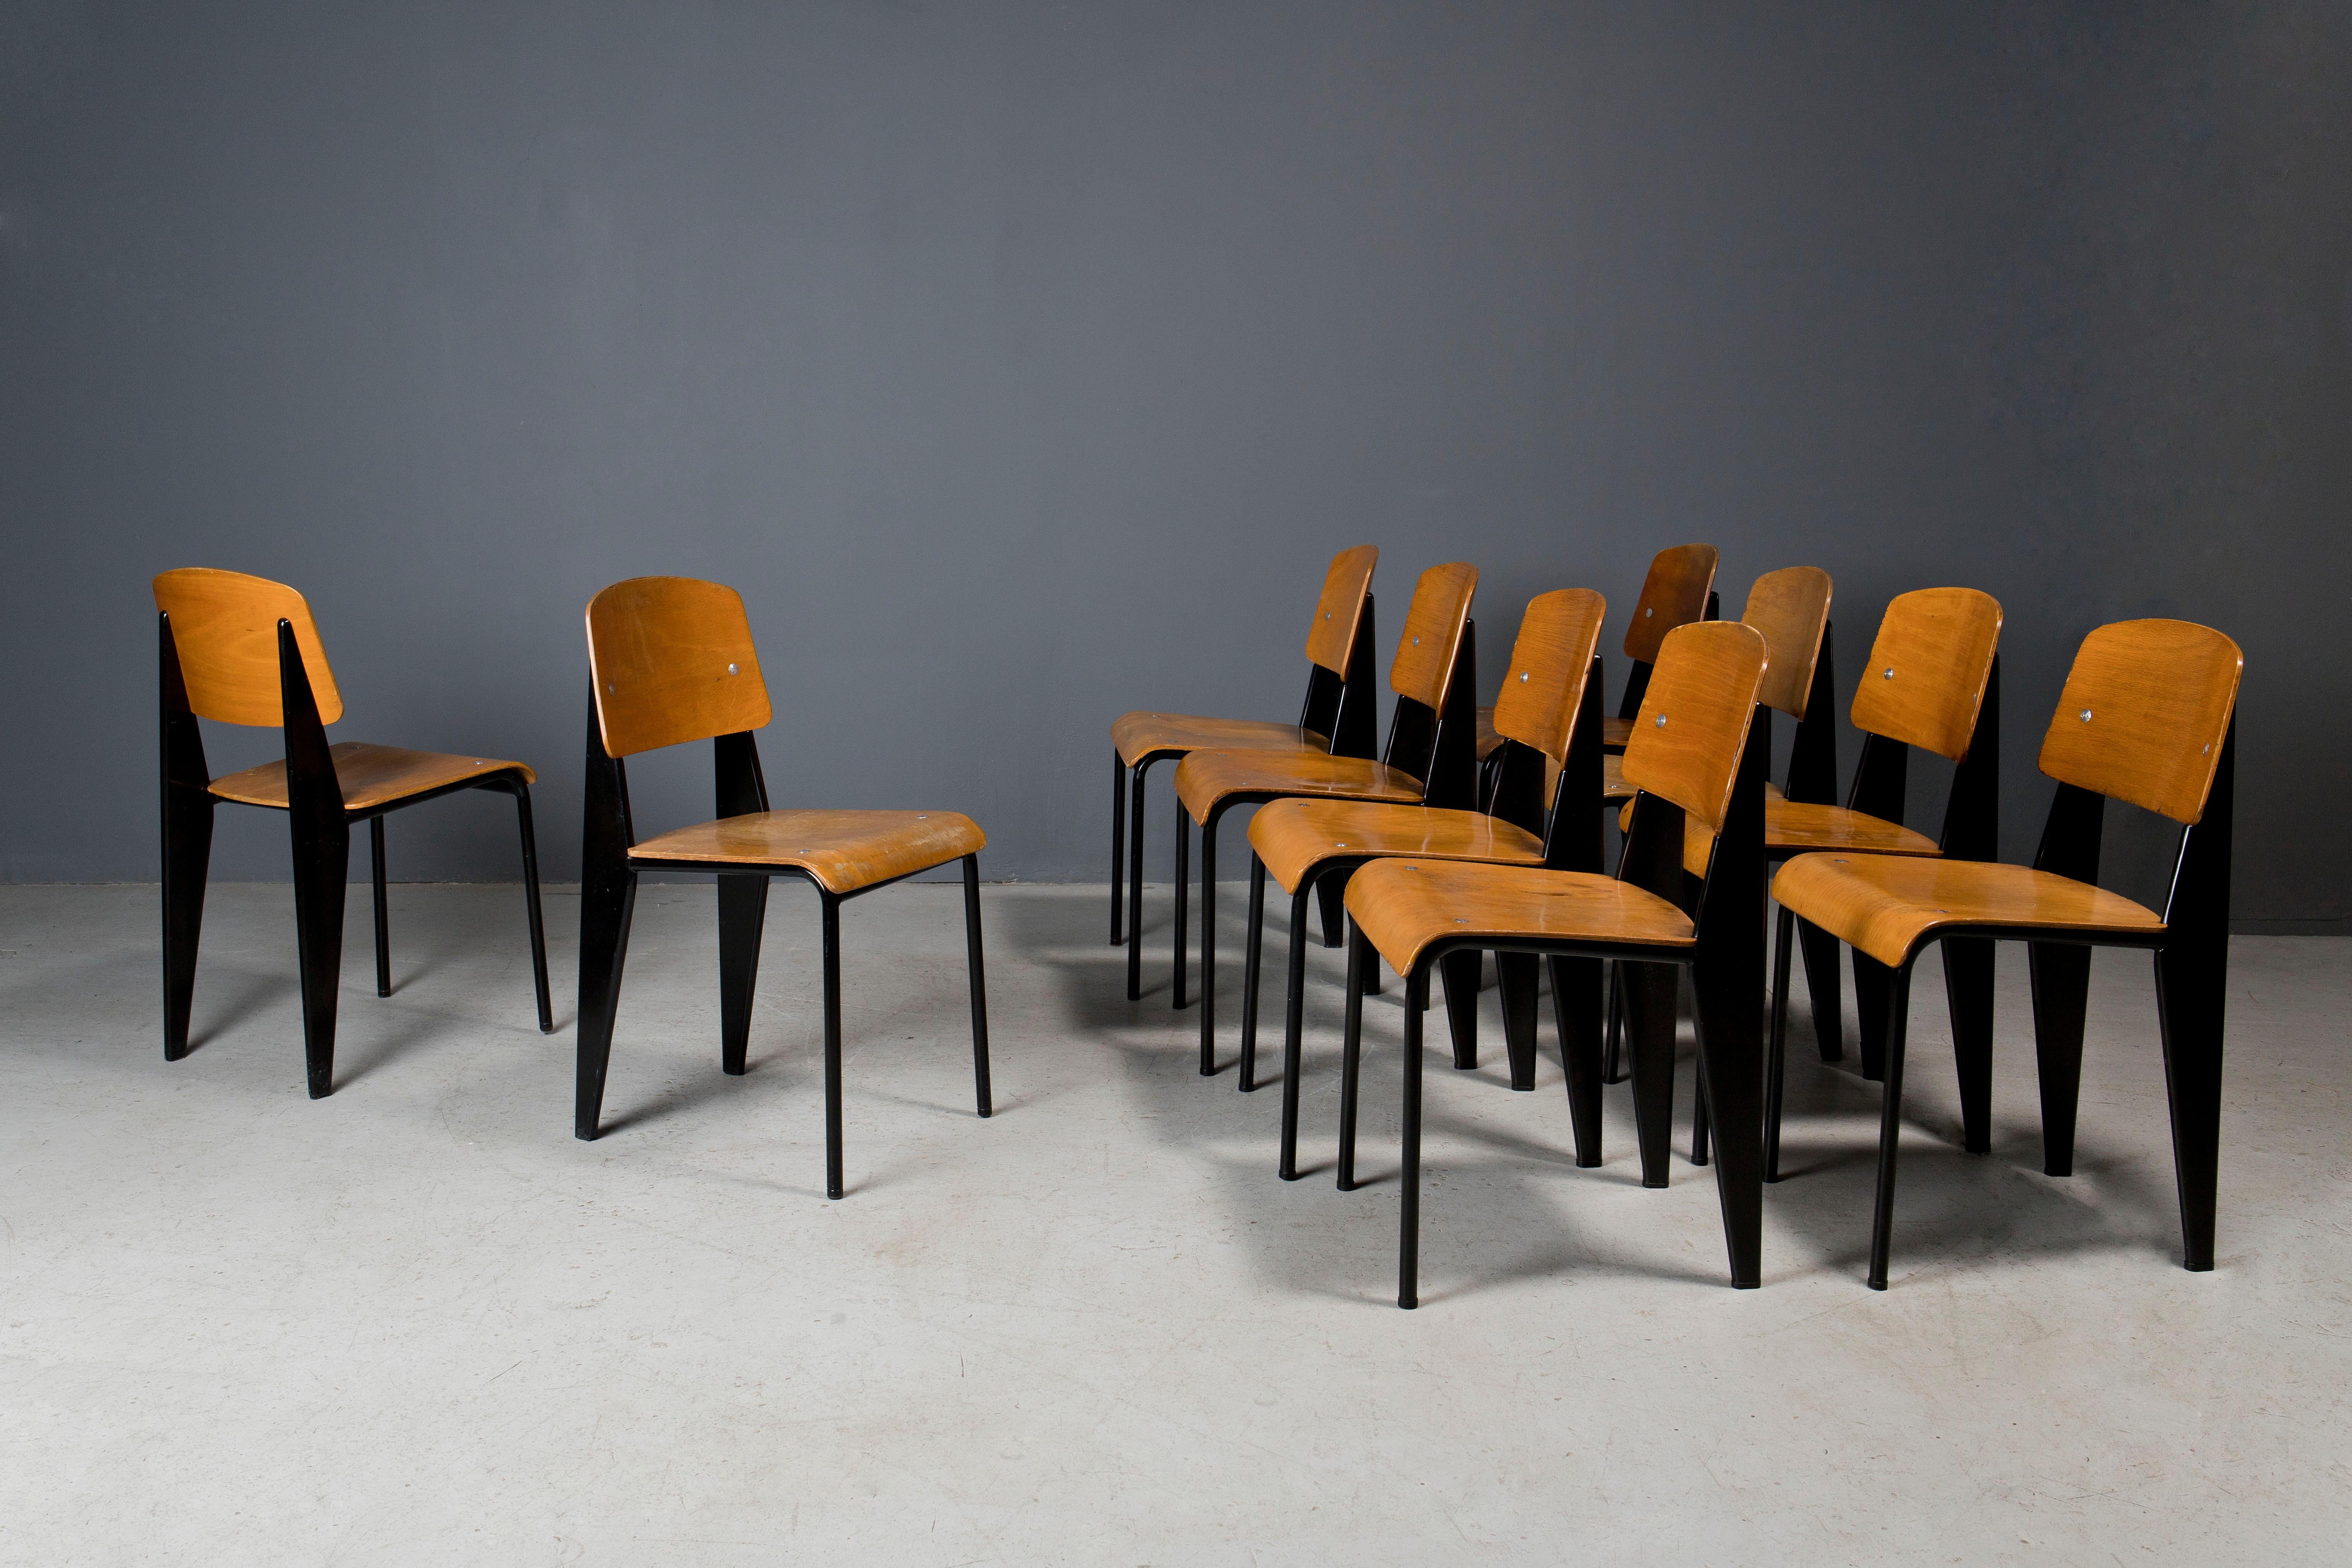 jean prouve chairs